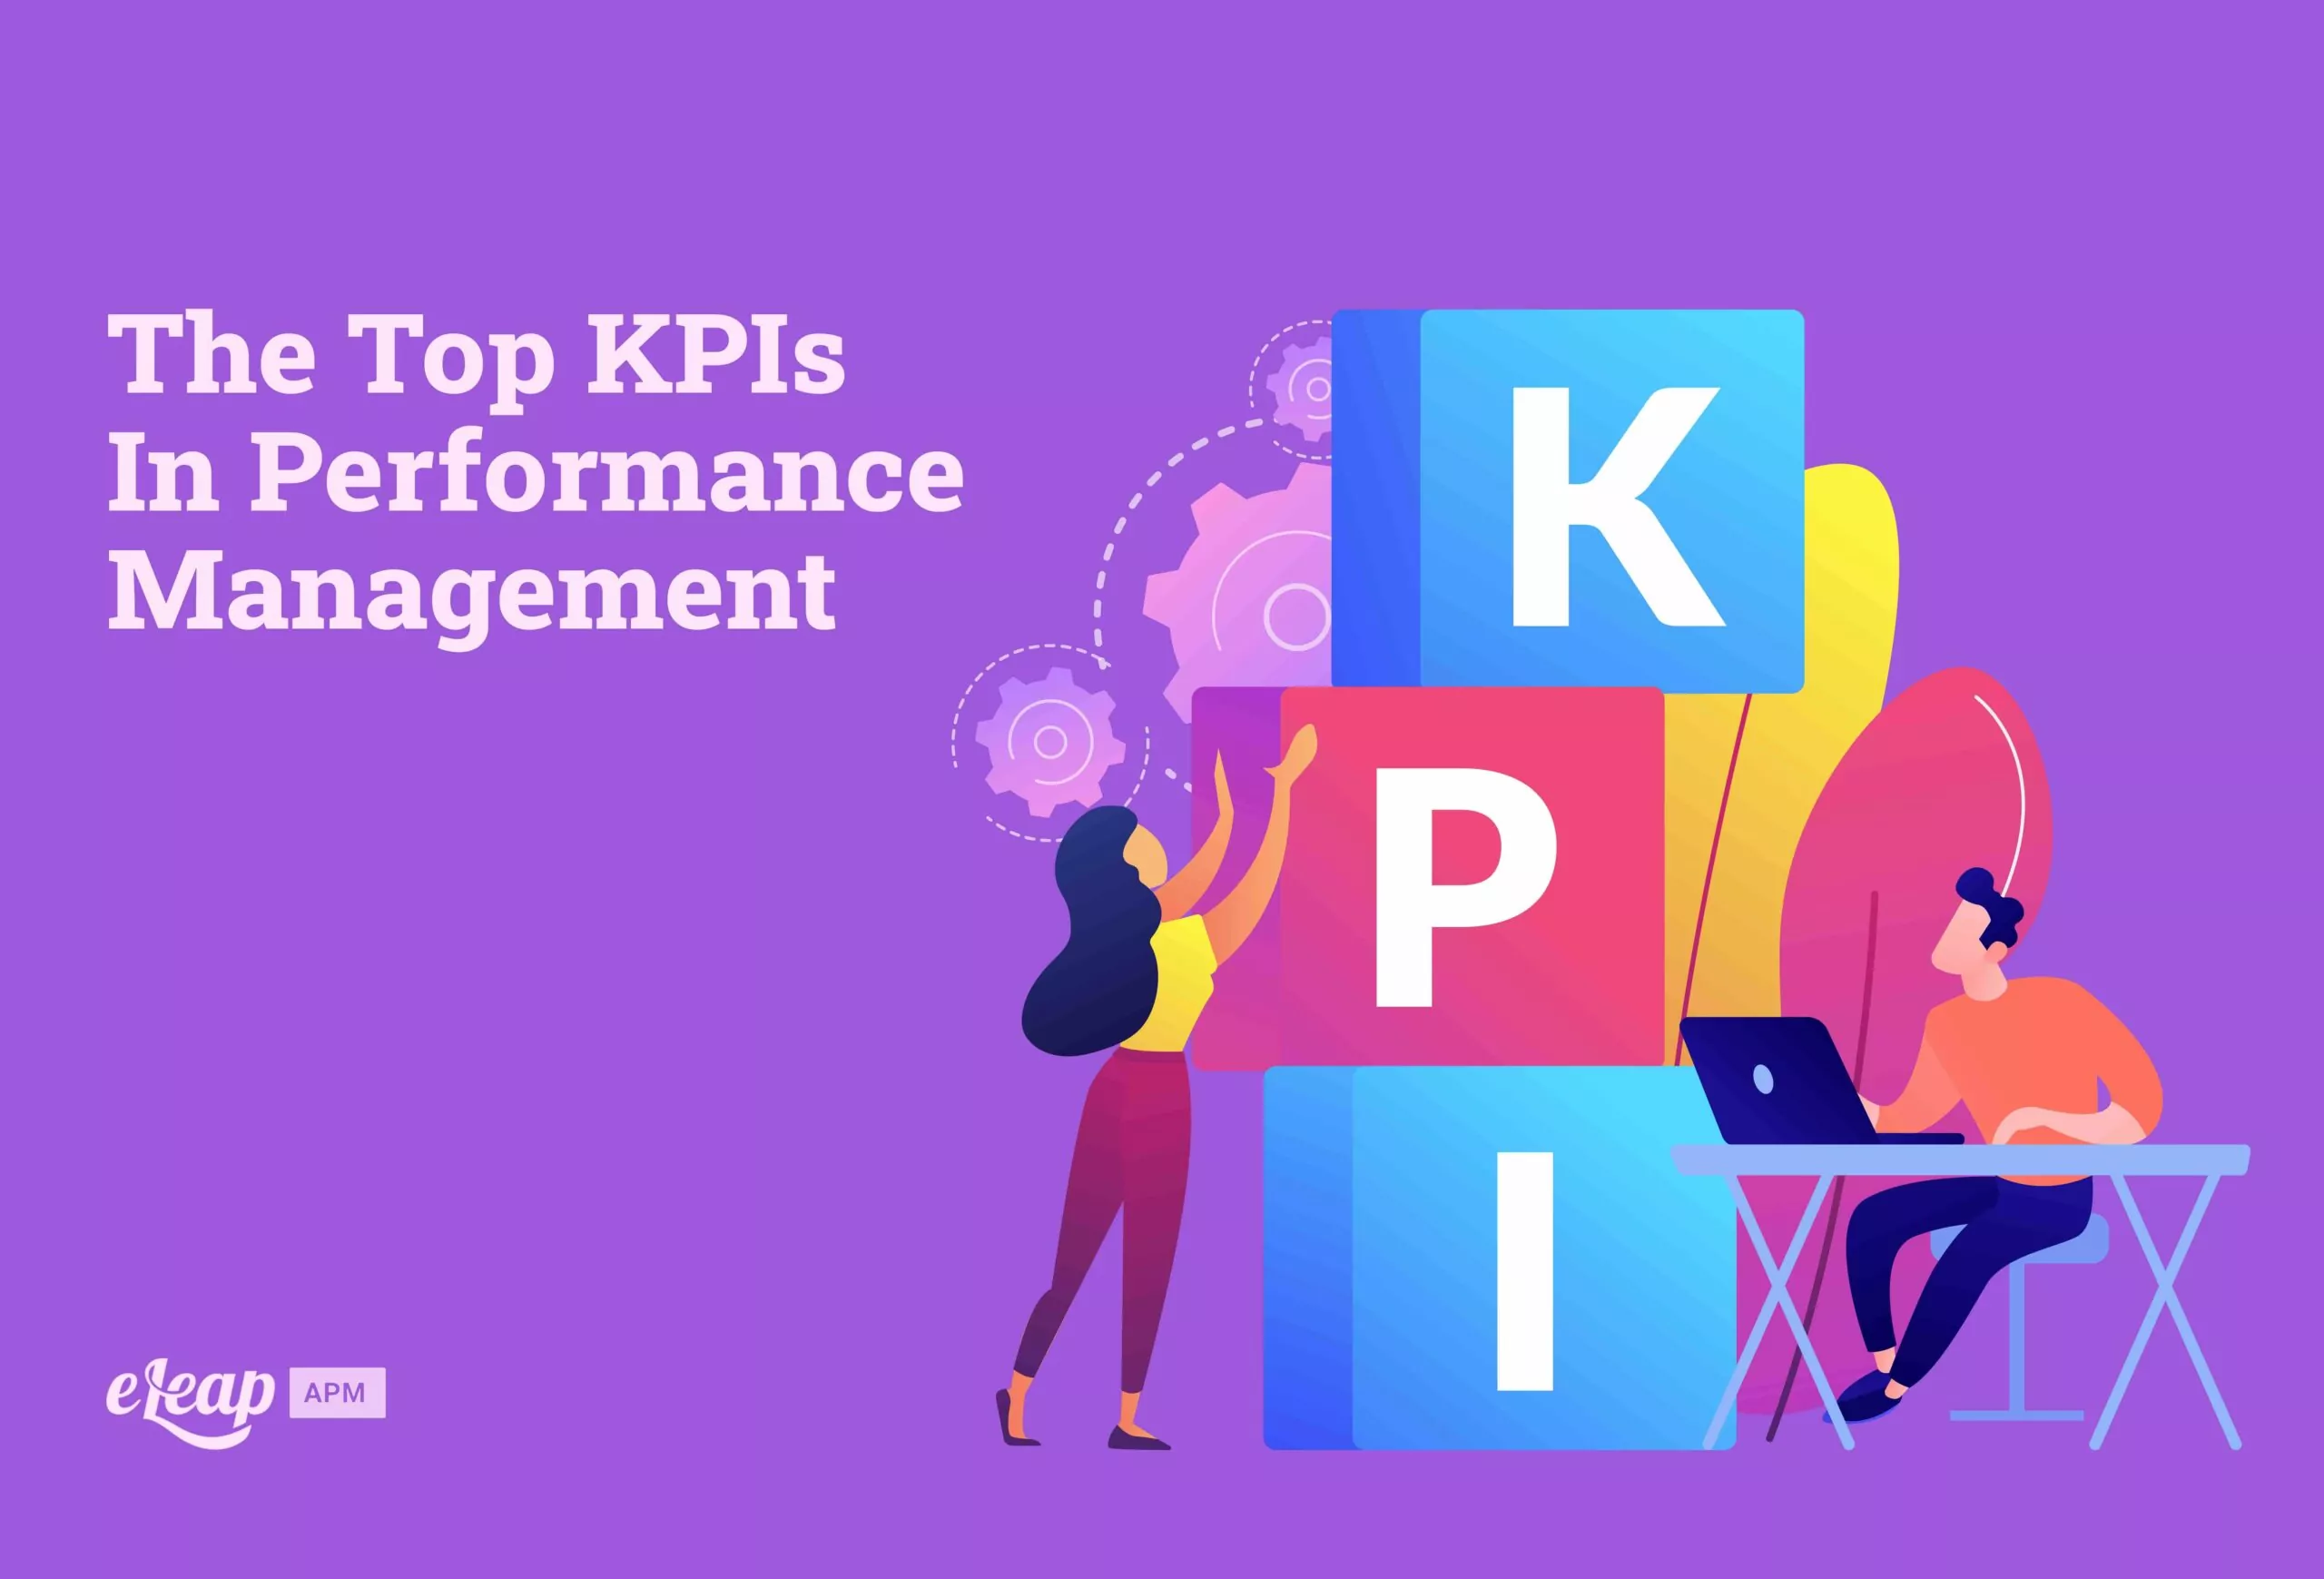 The Top KPIs In Performance Management